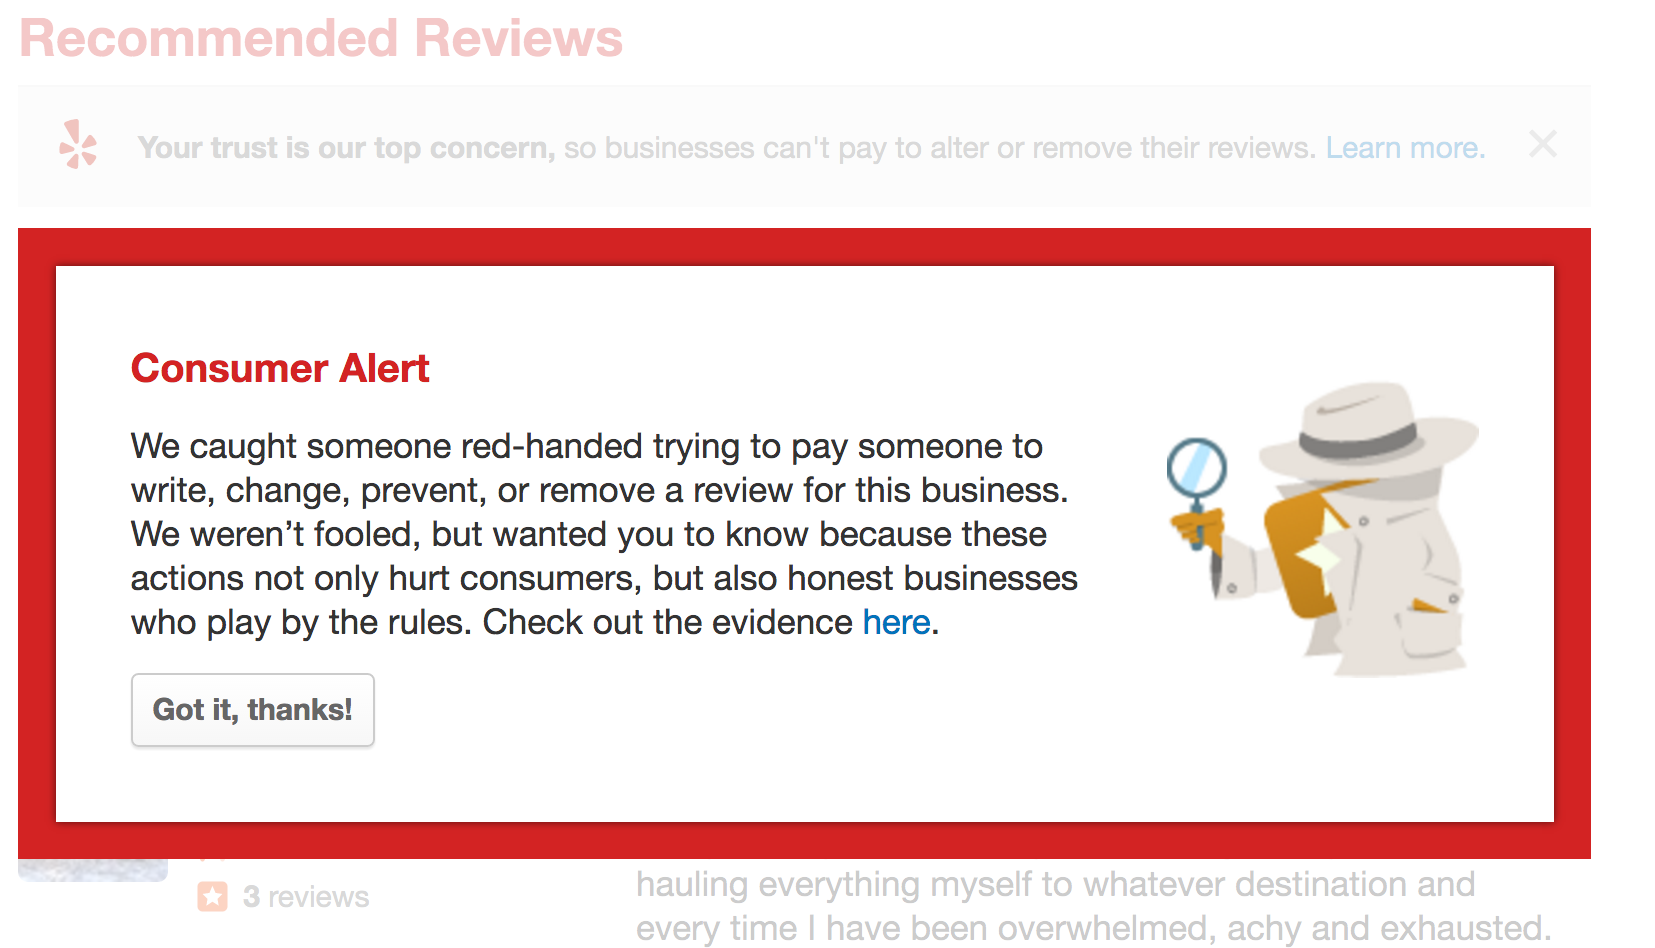 Yelp review writing service: Do Yelpers ever get sued for posting